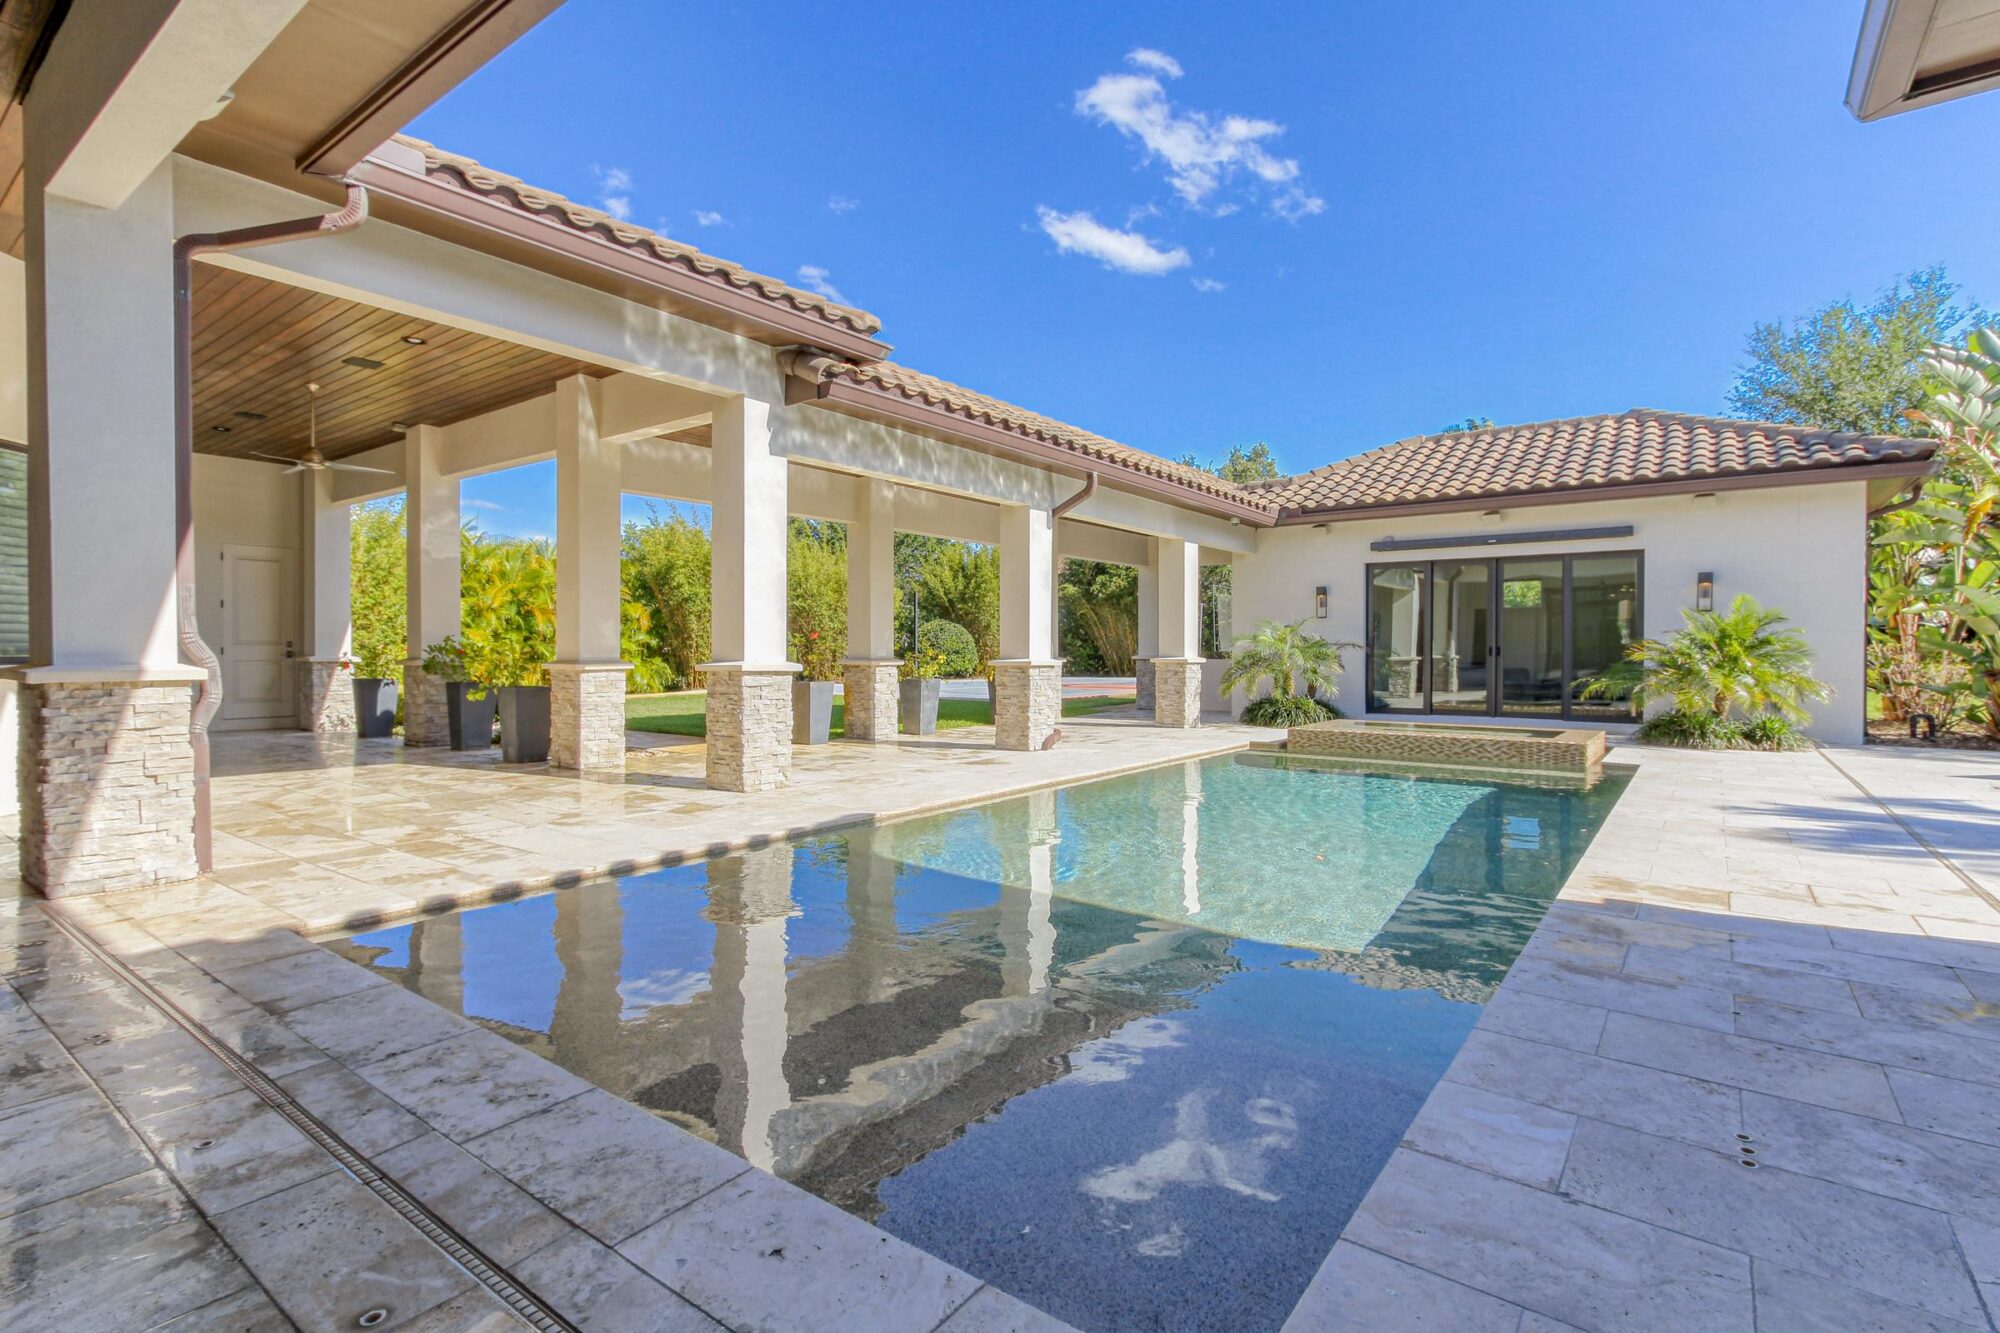 Salt Water Pool - Professional Listing Photography Windermere